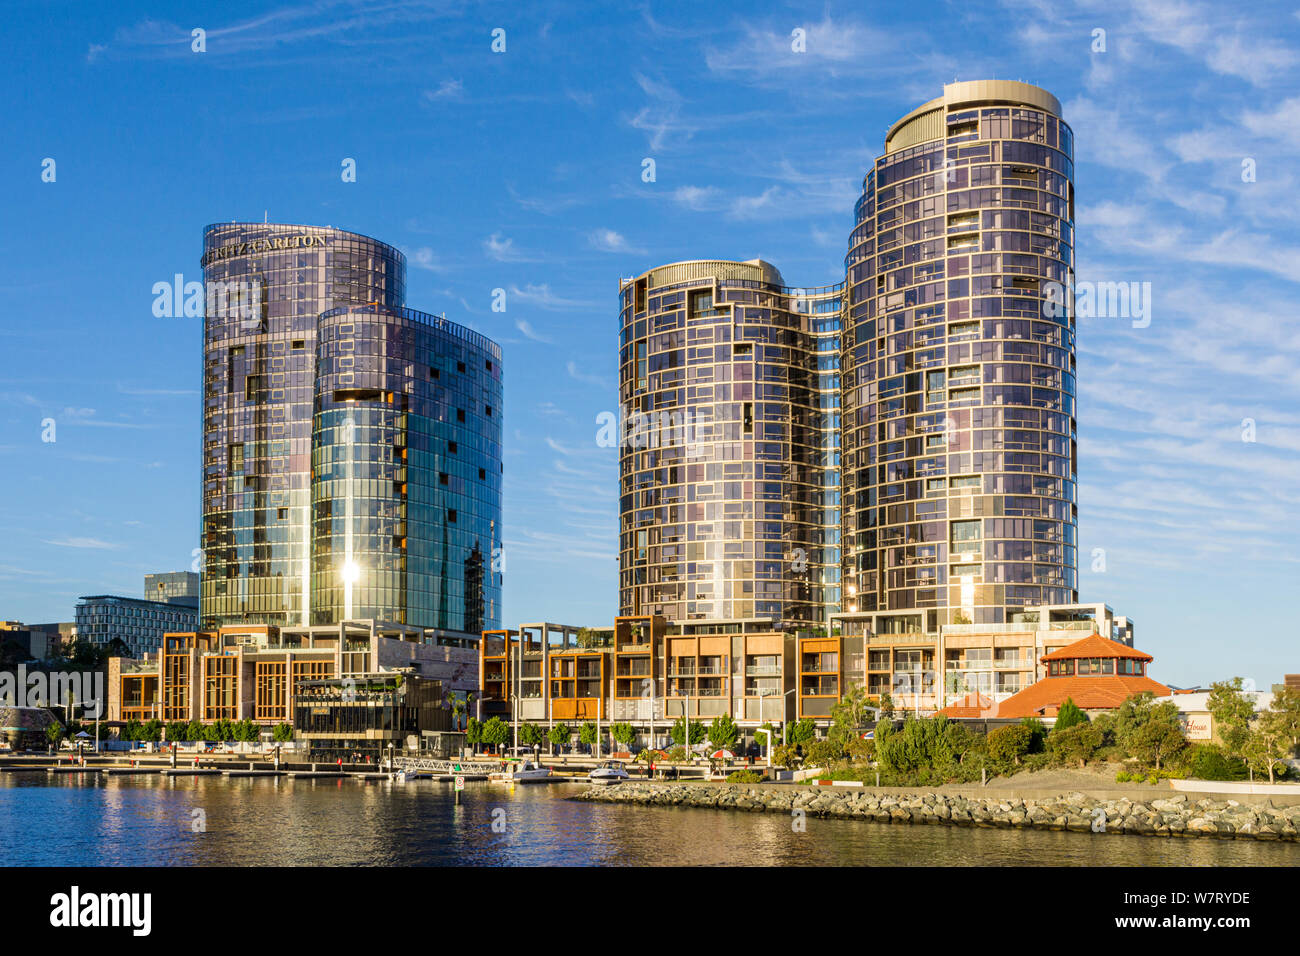 Elizabeth Quay cityscape with new apartments and hotel overlooking the Swan River, Perth, Western Australia Stock Photo